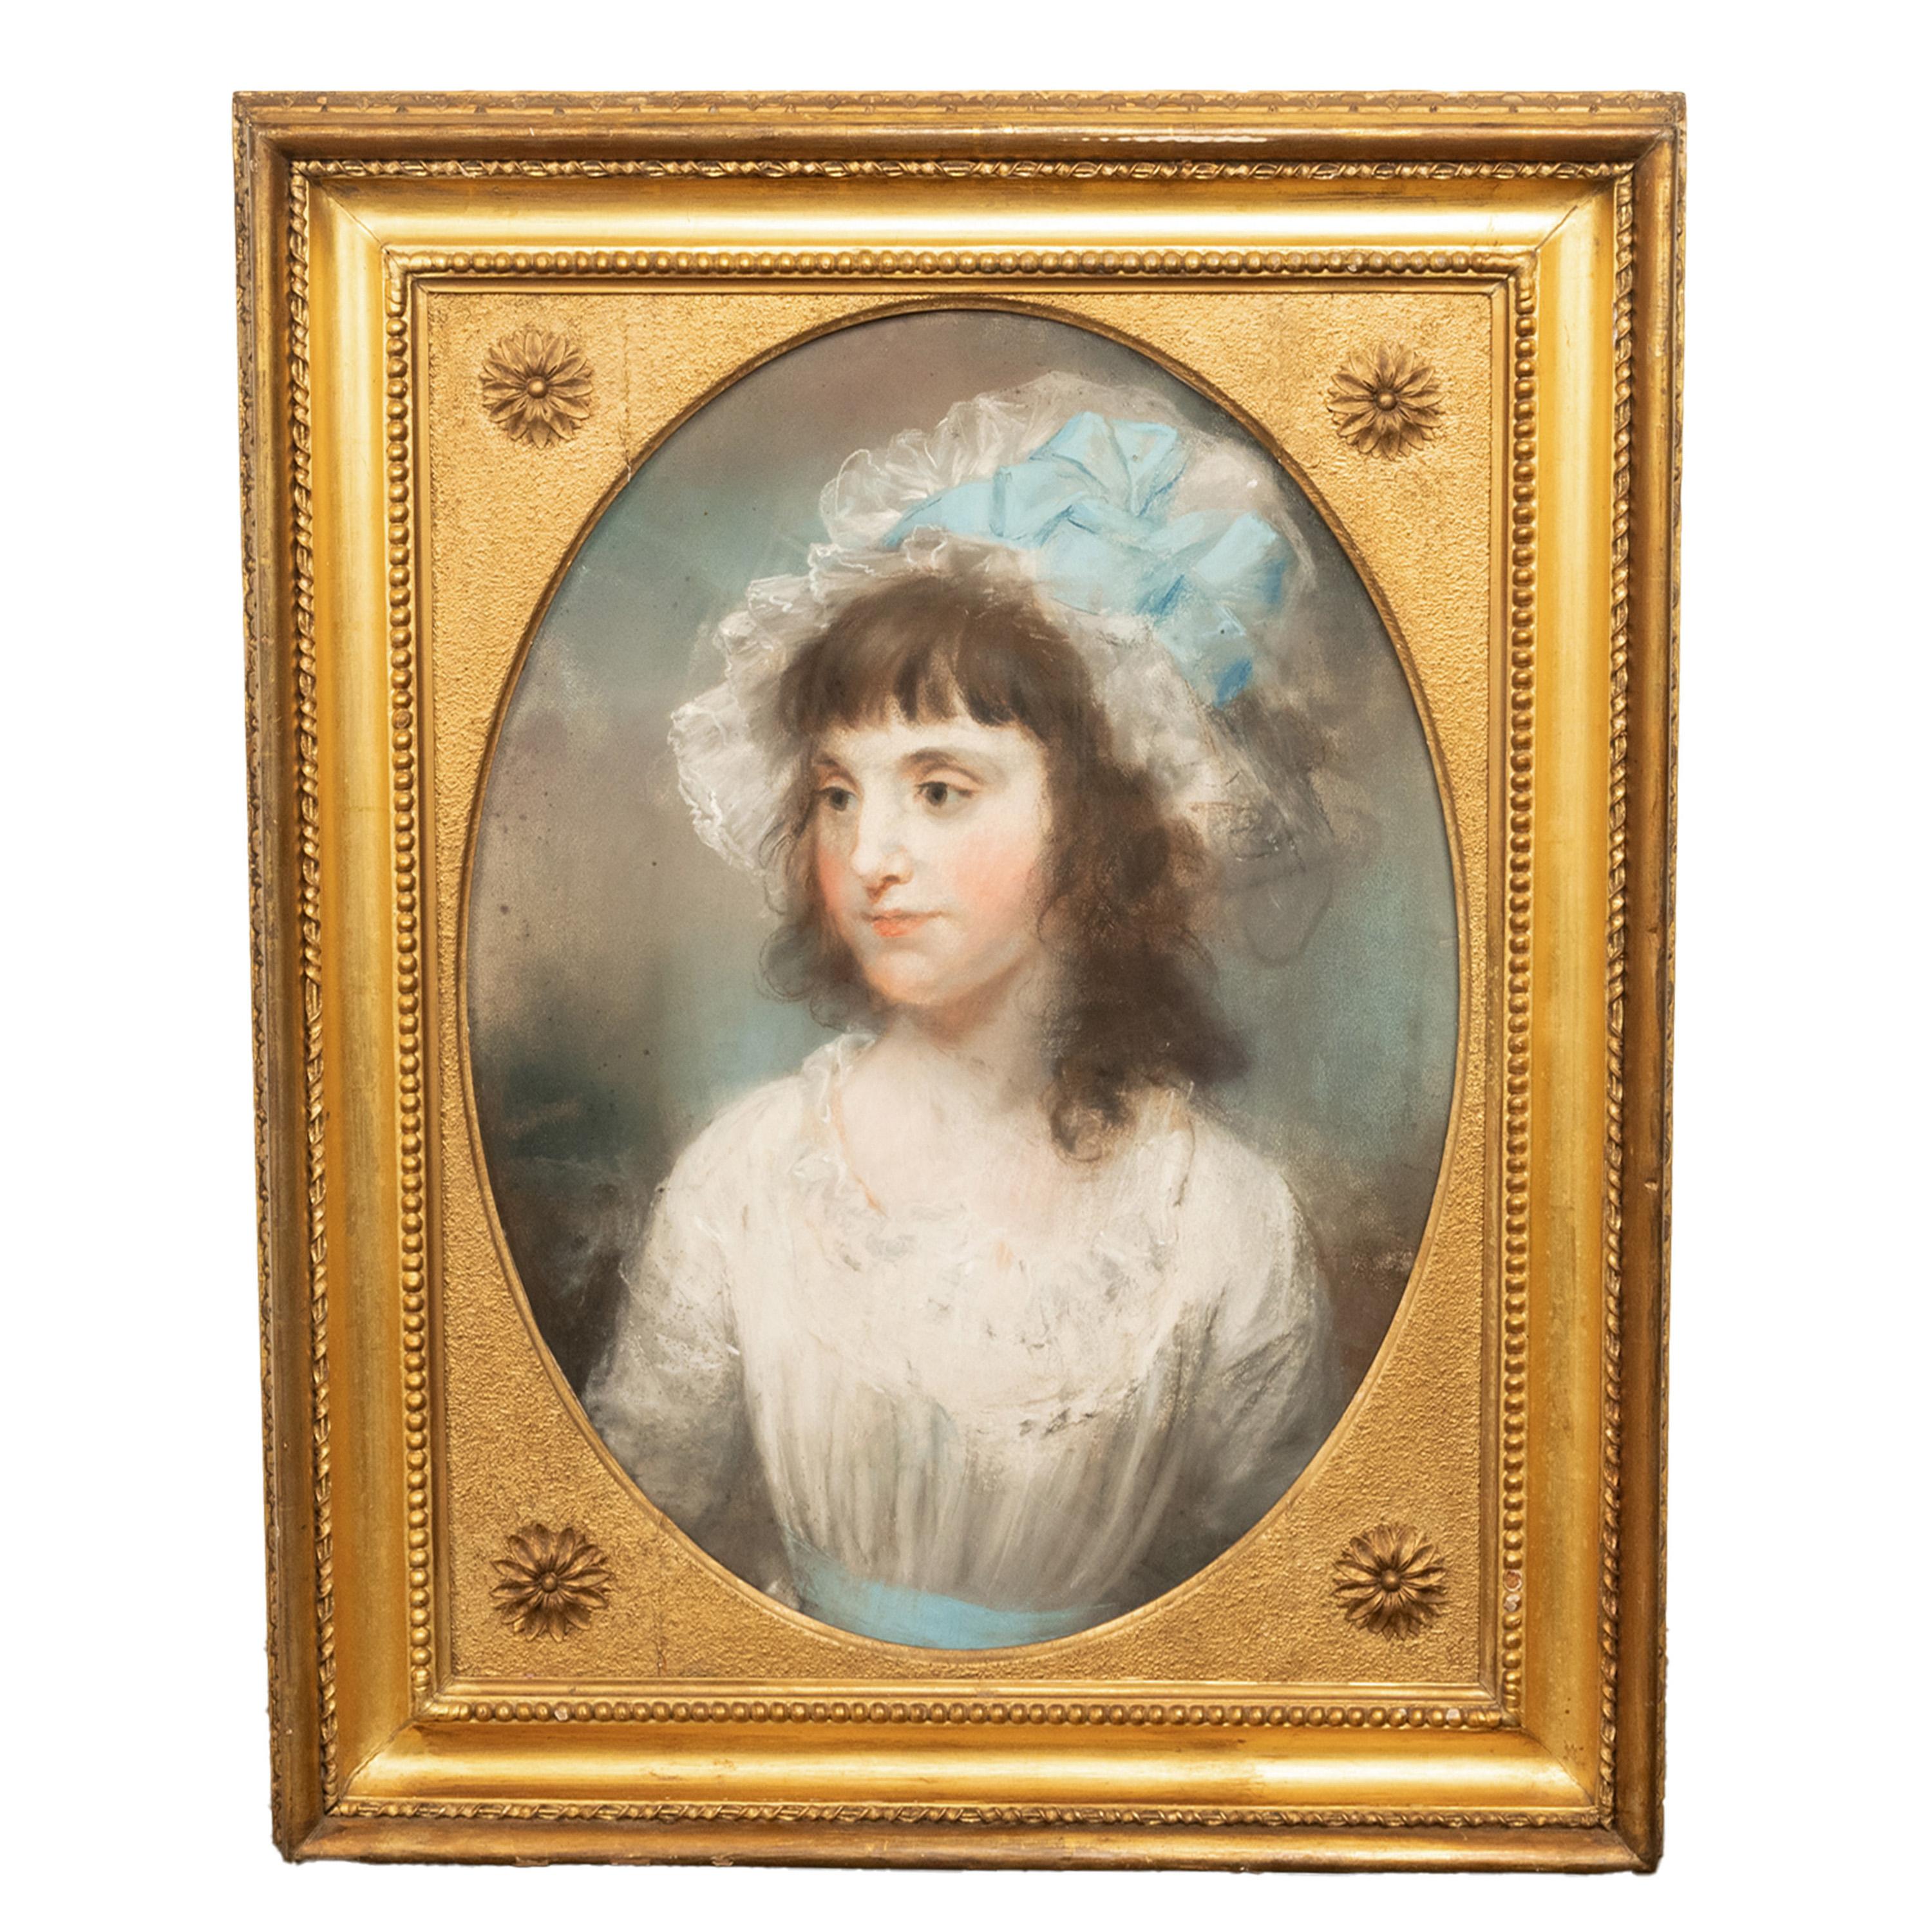 An important authenticated & documented 18th century portrait by John Russell R A (1745-1809), England, signed & dated 1789.
This rather charming & sensitive portrait of a young girl demonstrates the skill and dexterity of one of the most renowned